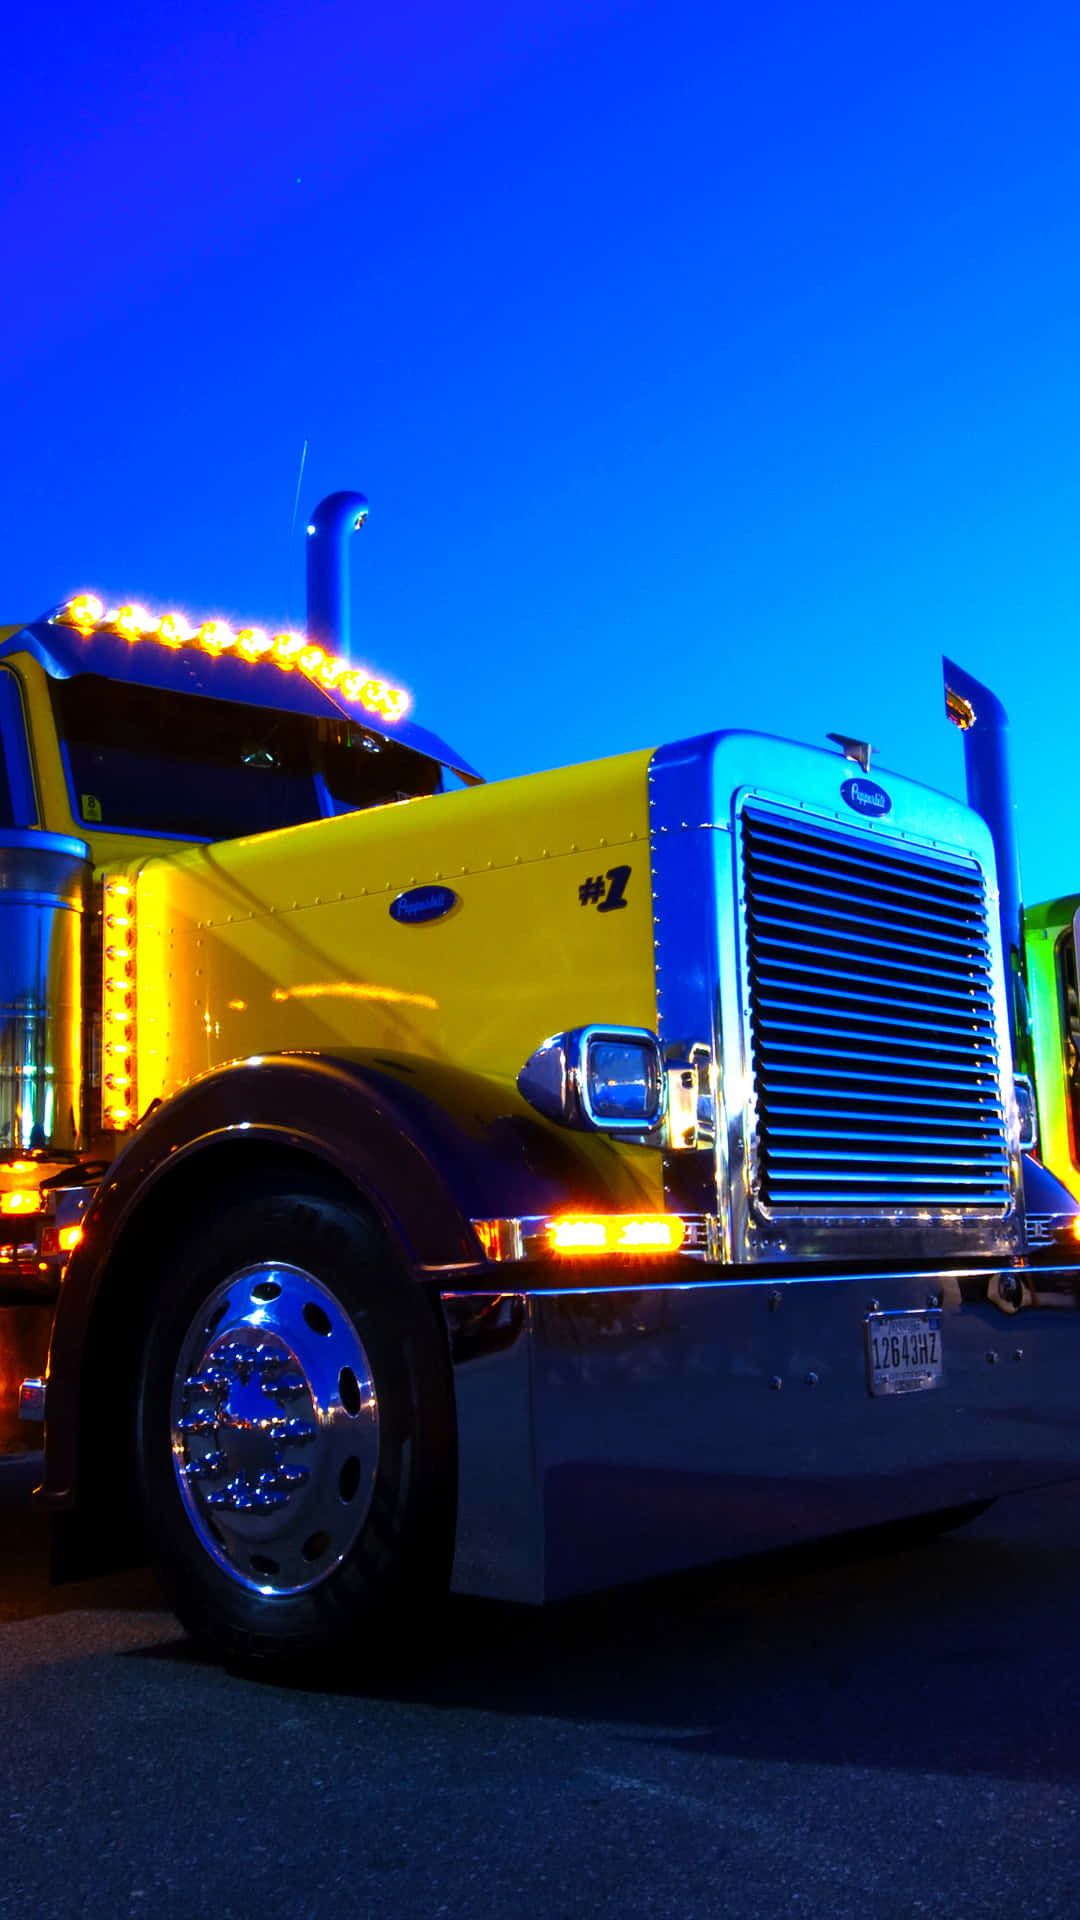 A White Kenworth Truck on a Navy Blue Background